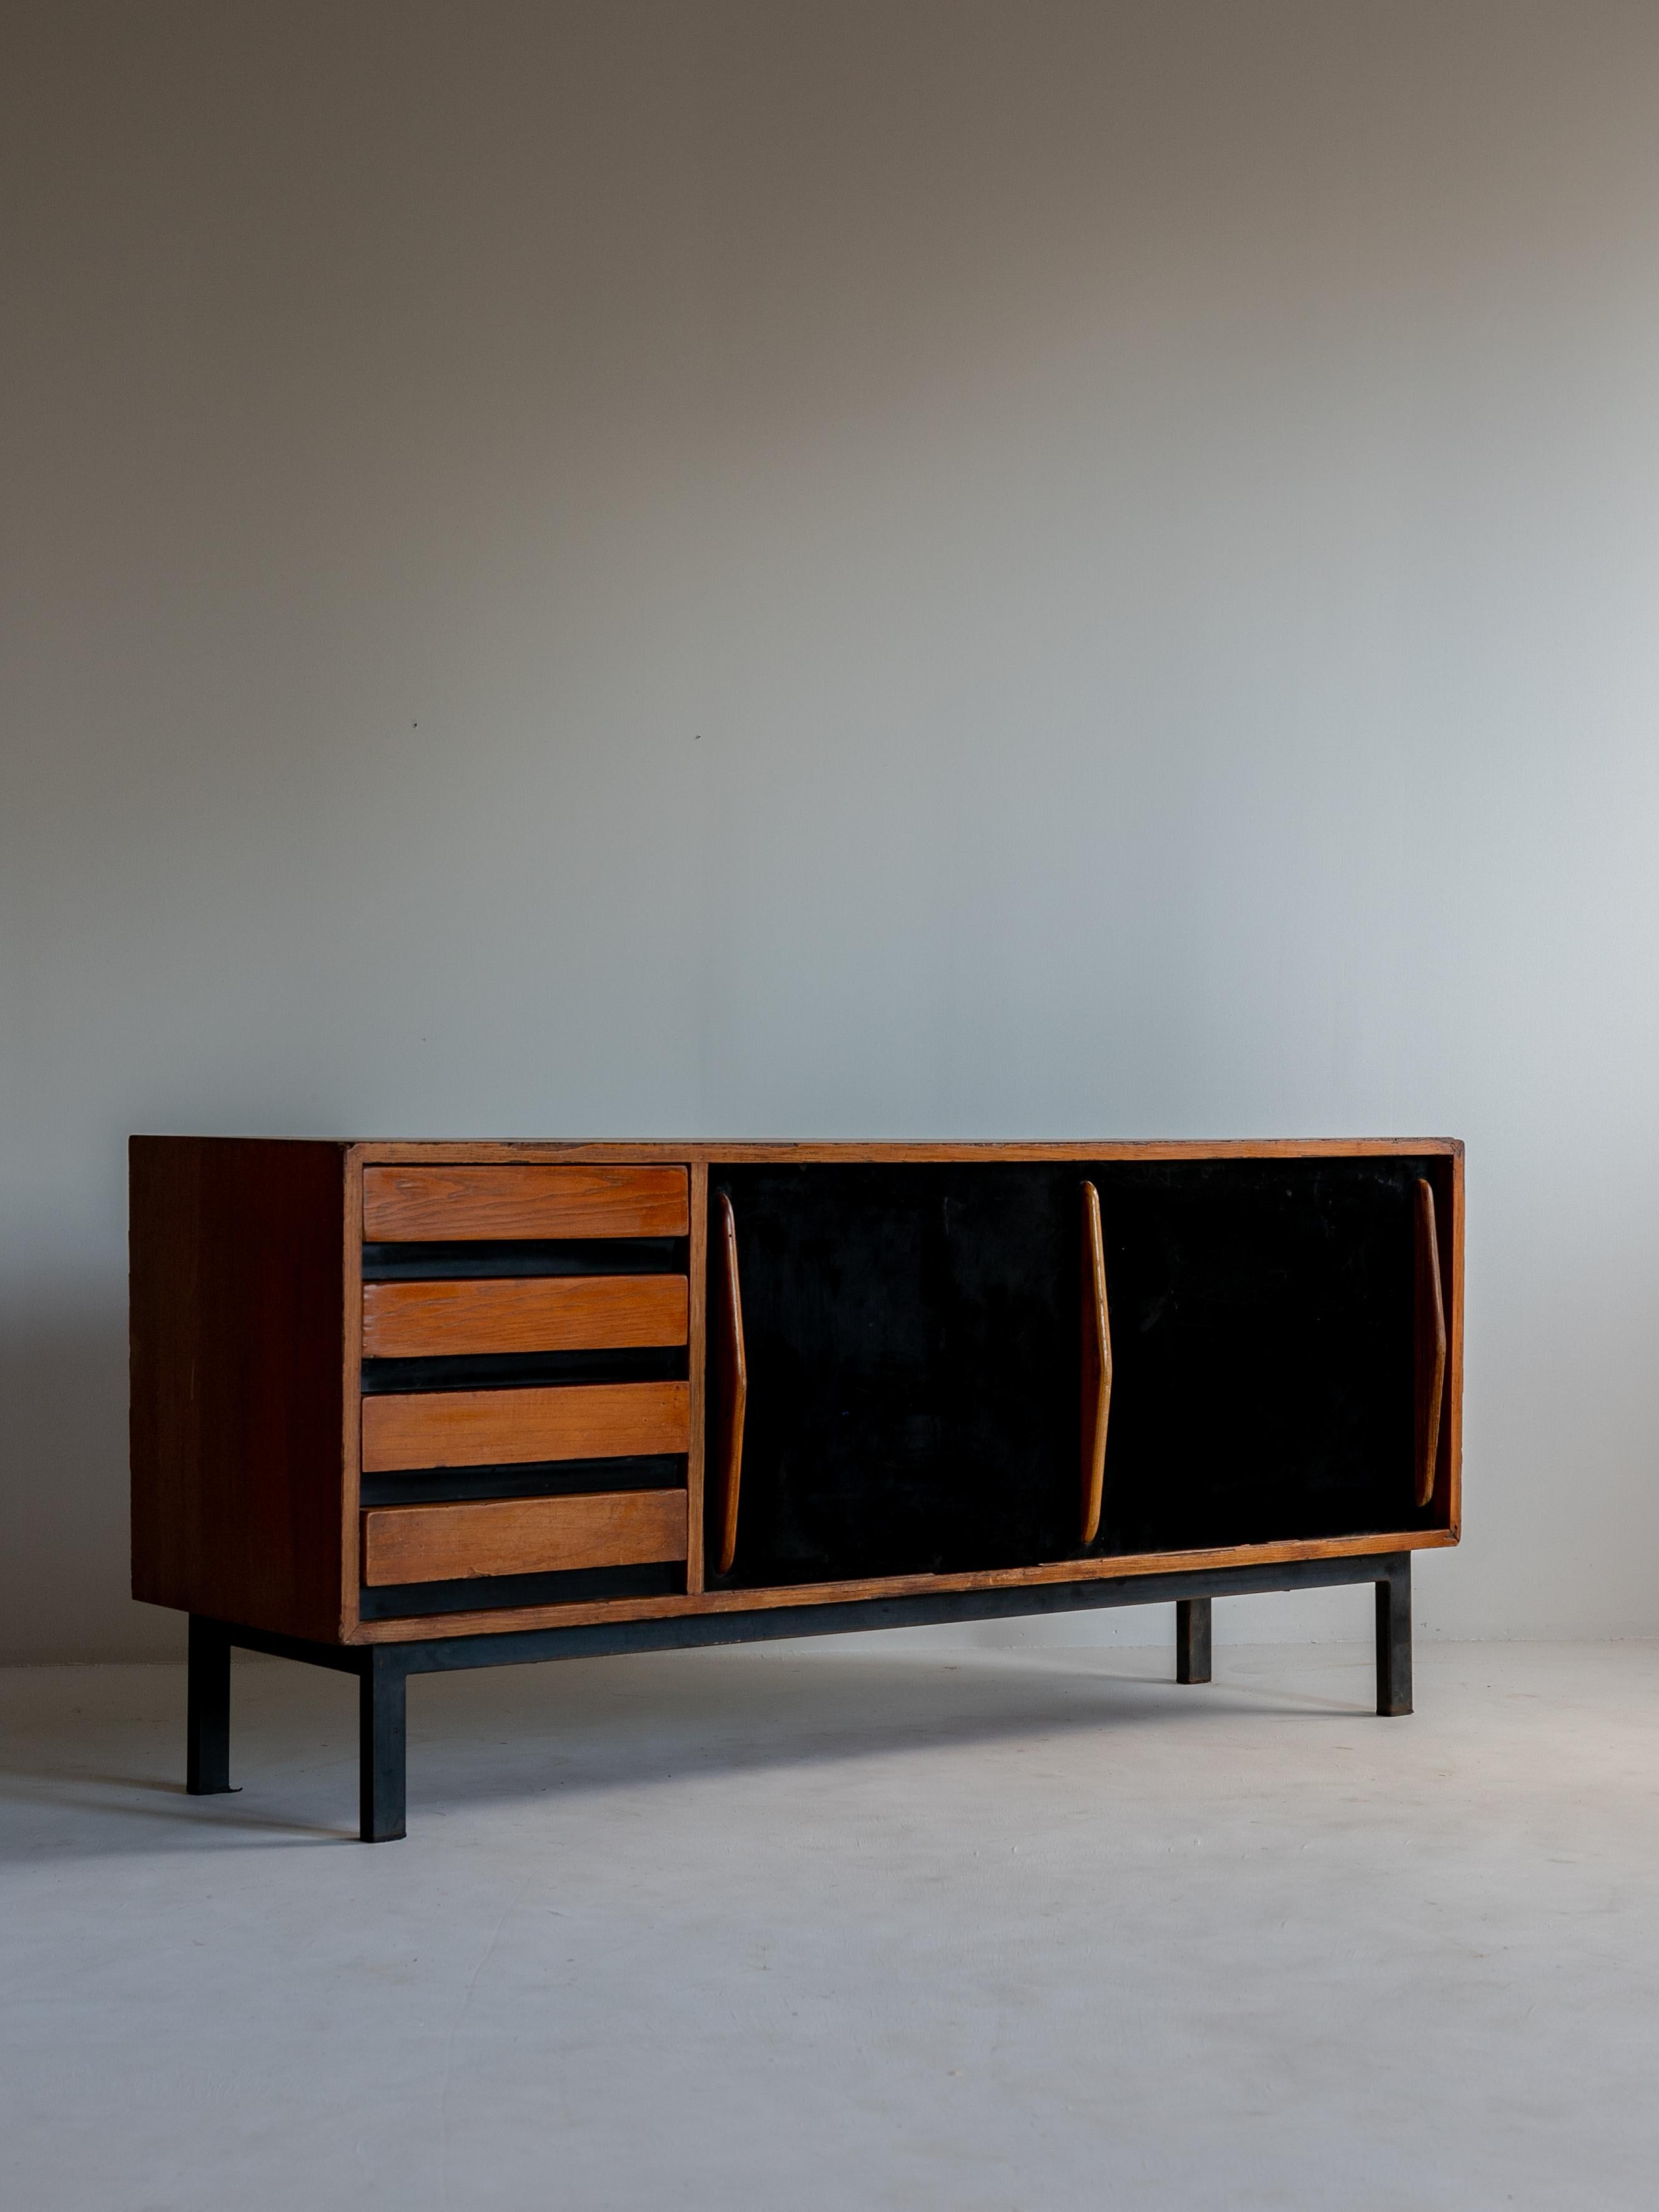 Mauritanian Sideboard from Cité Cansado by Charlotte Perriand